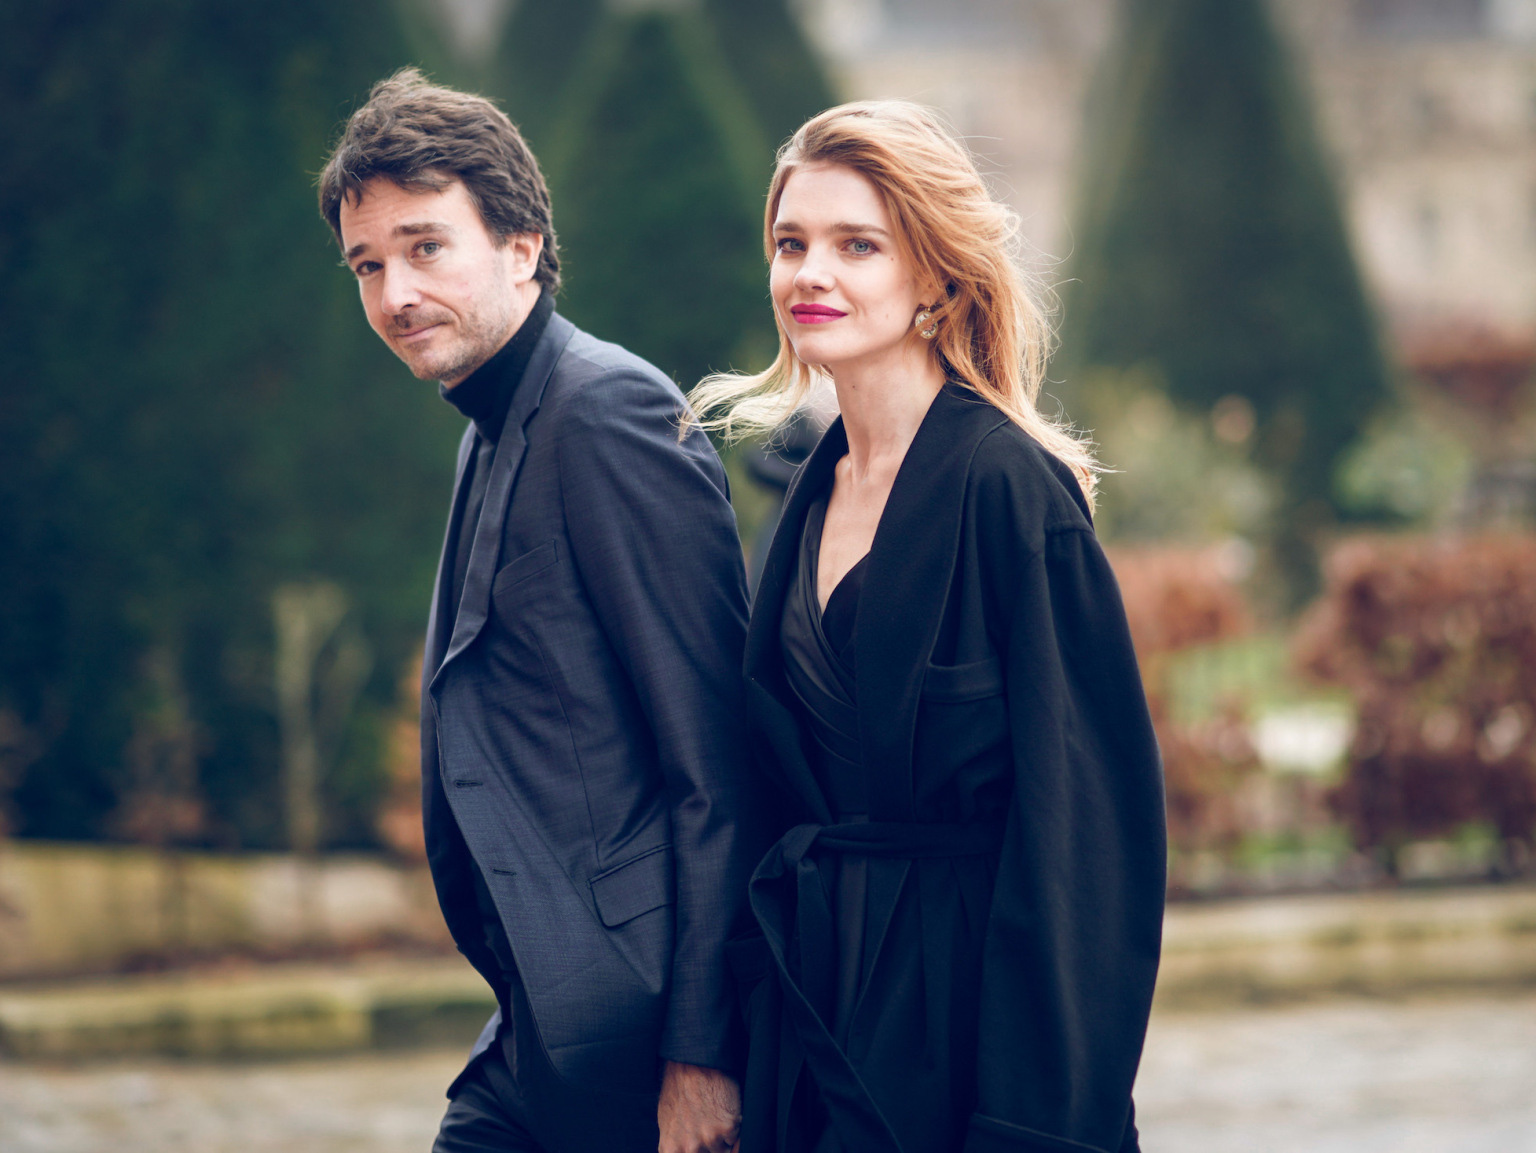 NATALIA VODIANOVA AND SON OF LVMH PRESIDENT GET MARRIED SIMPLY